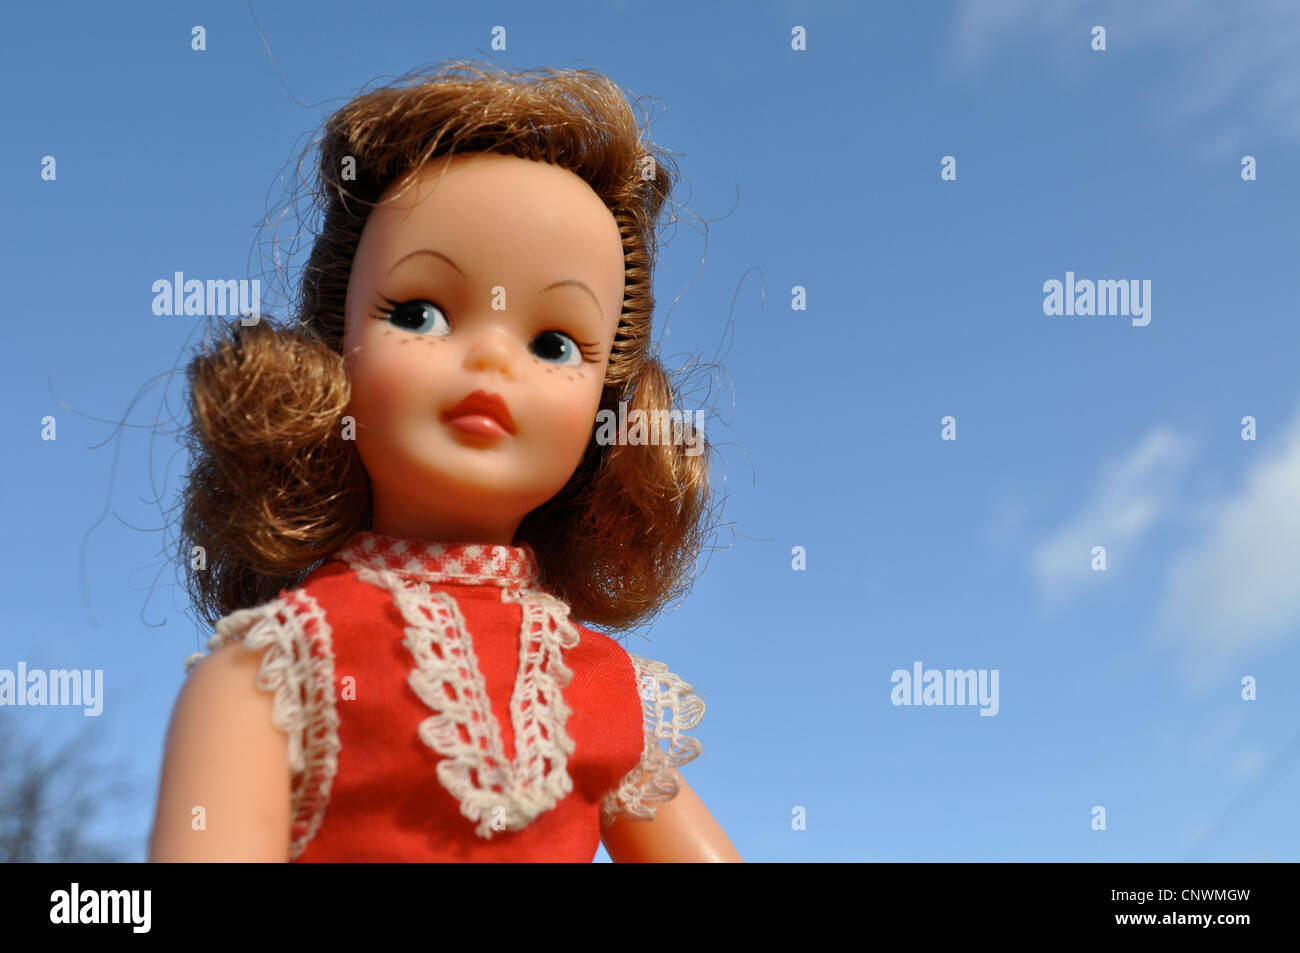 Pepper doll, sister of vintage Tammy doll by Ideal in 1960s playsuit Stock Photo